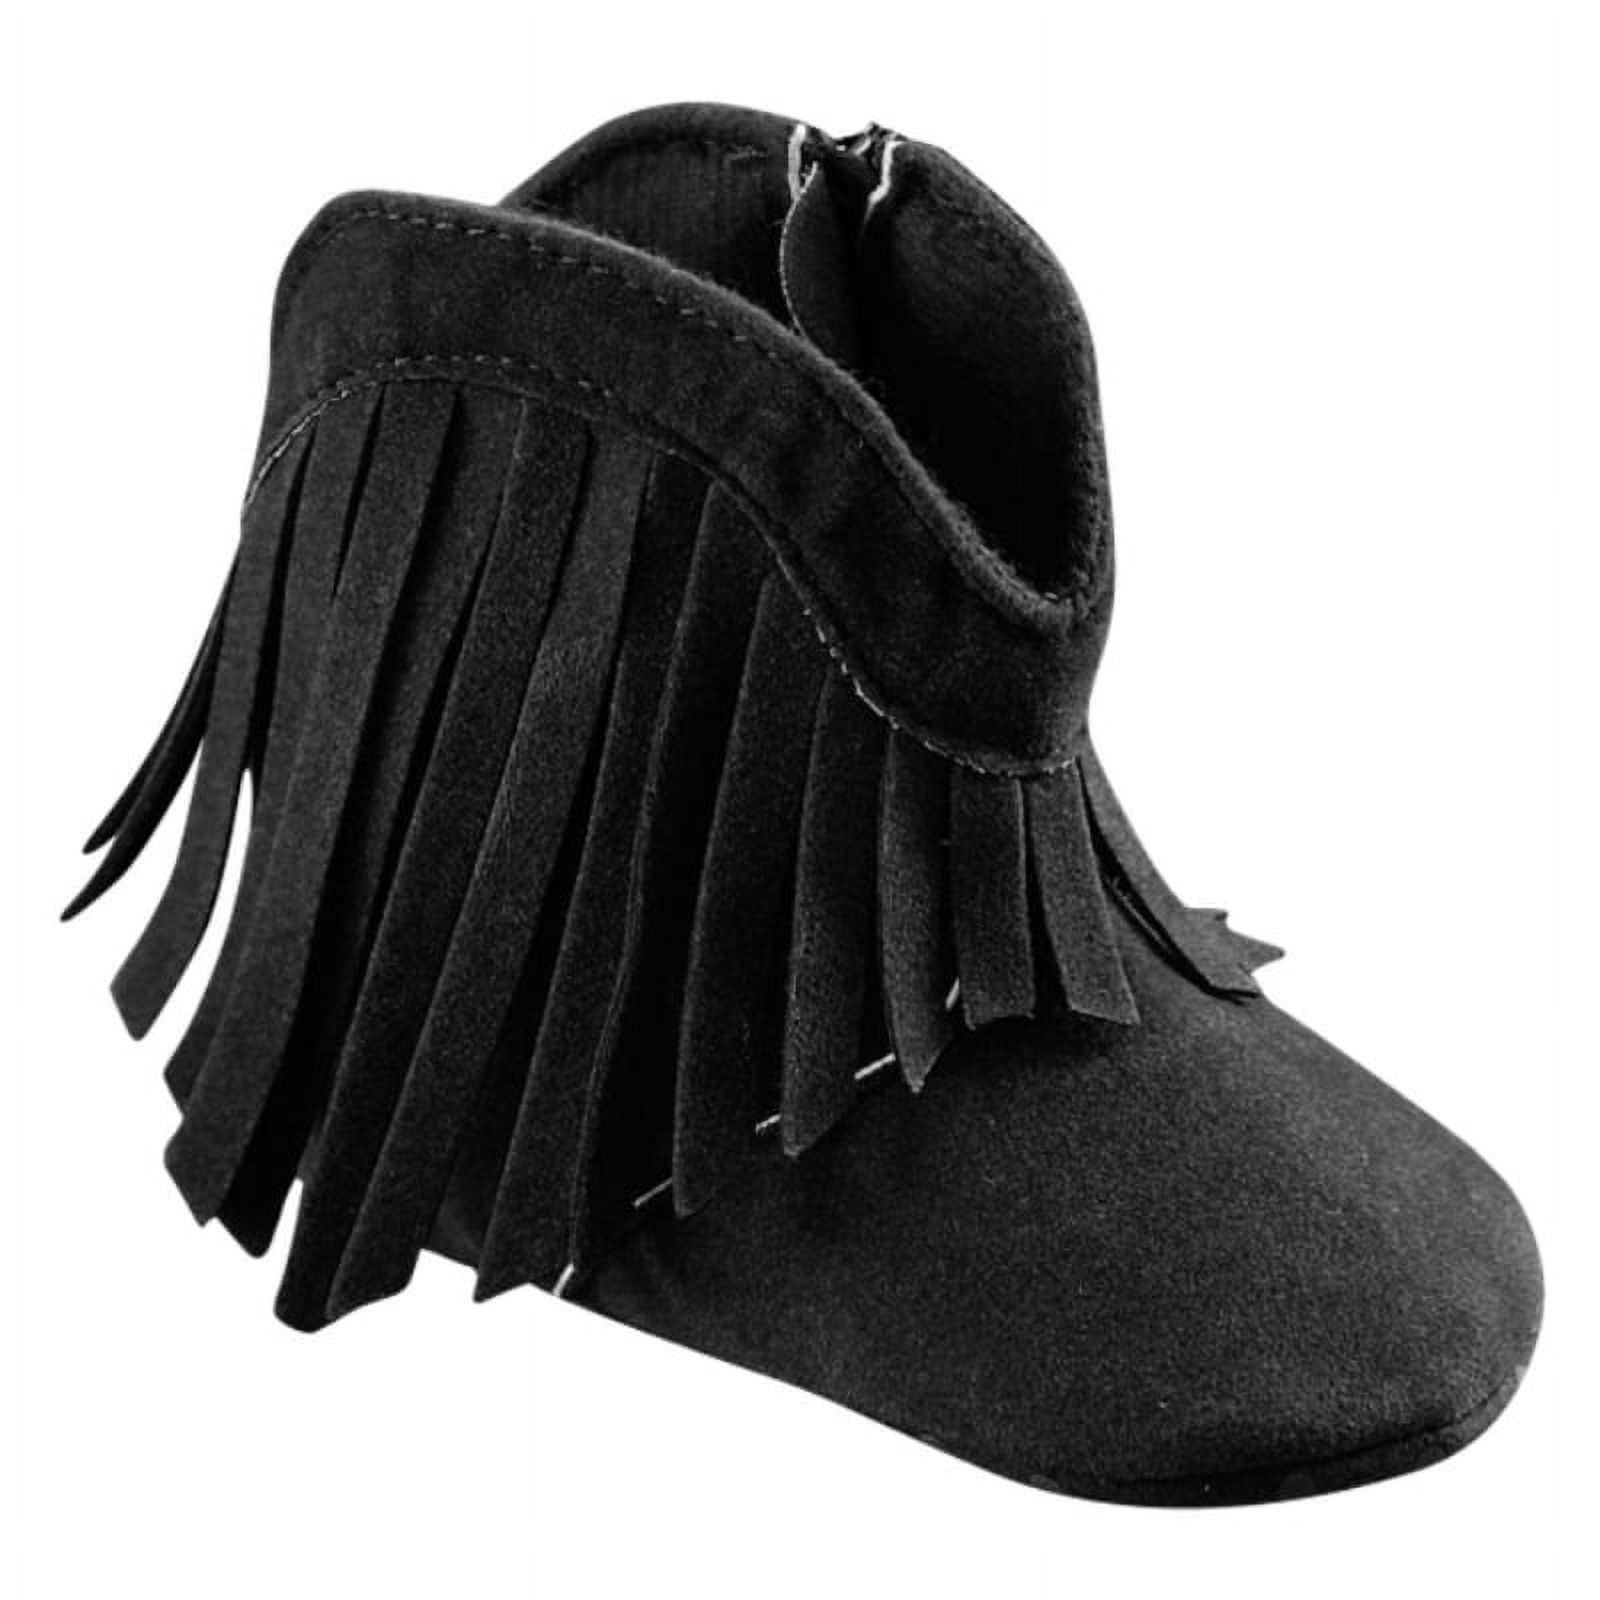 SHEMALL Newborn Toddler Tassel Boots Baby Boy Girl Soft Soled Winter Shoes - image 4 of 5